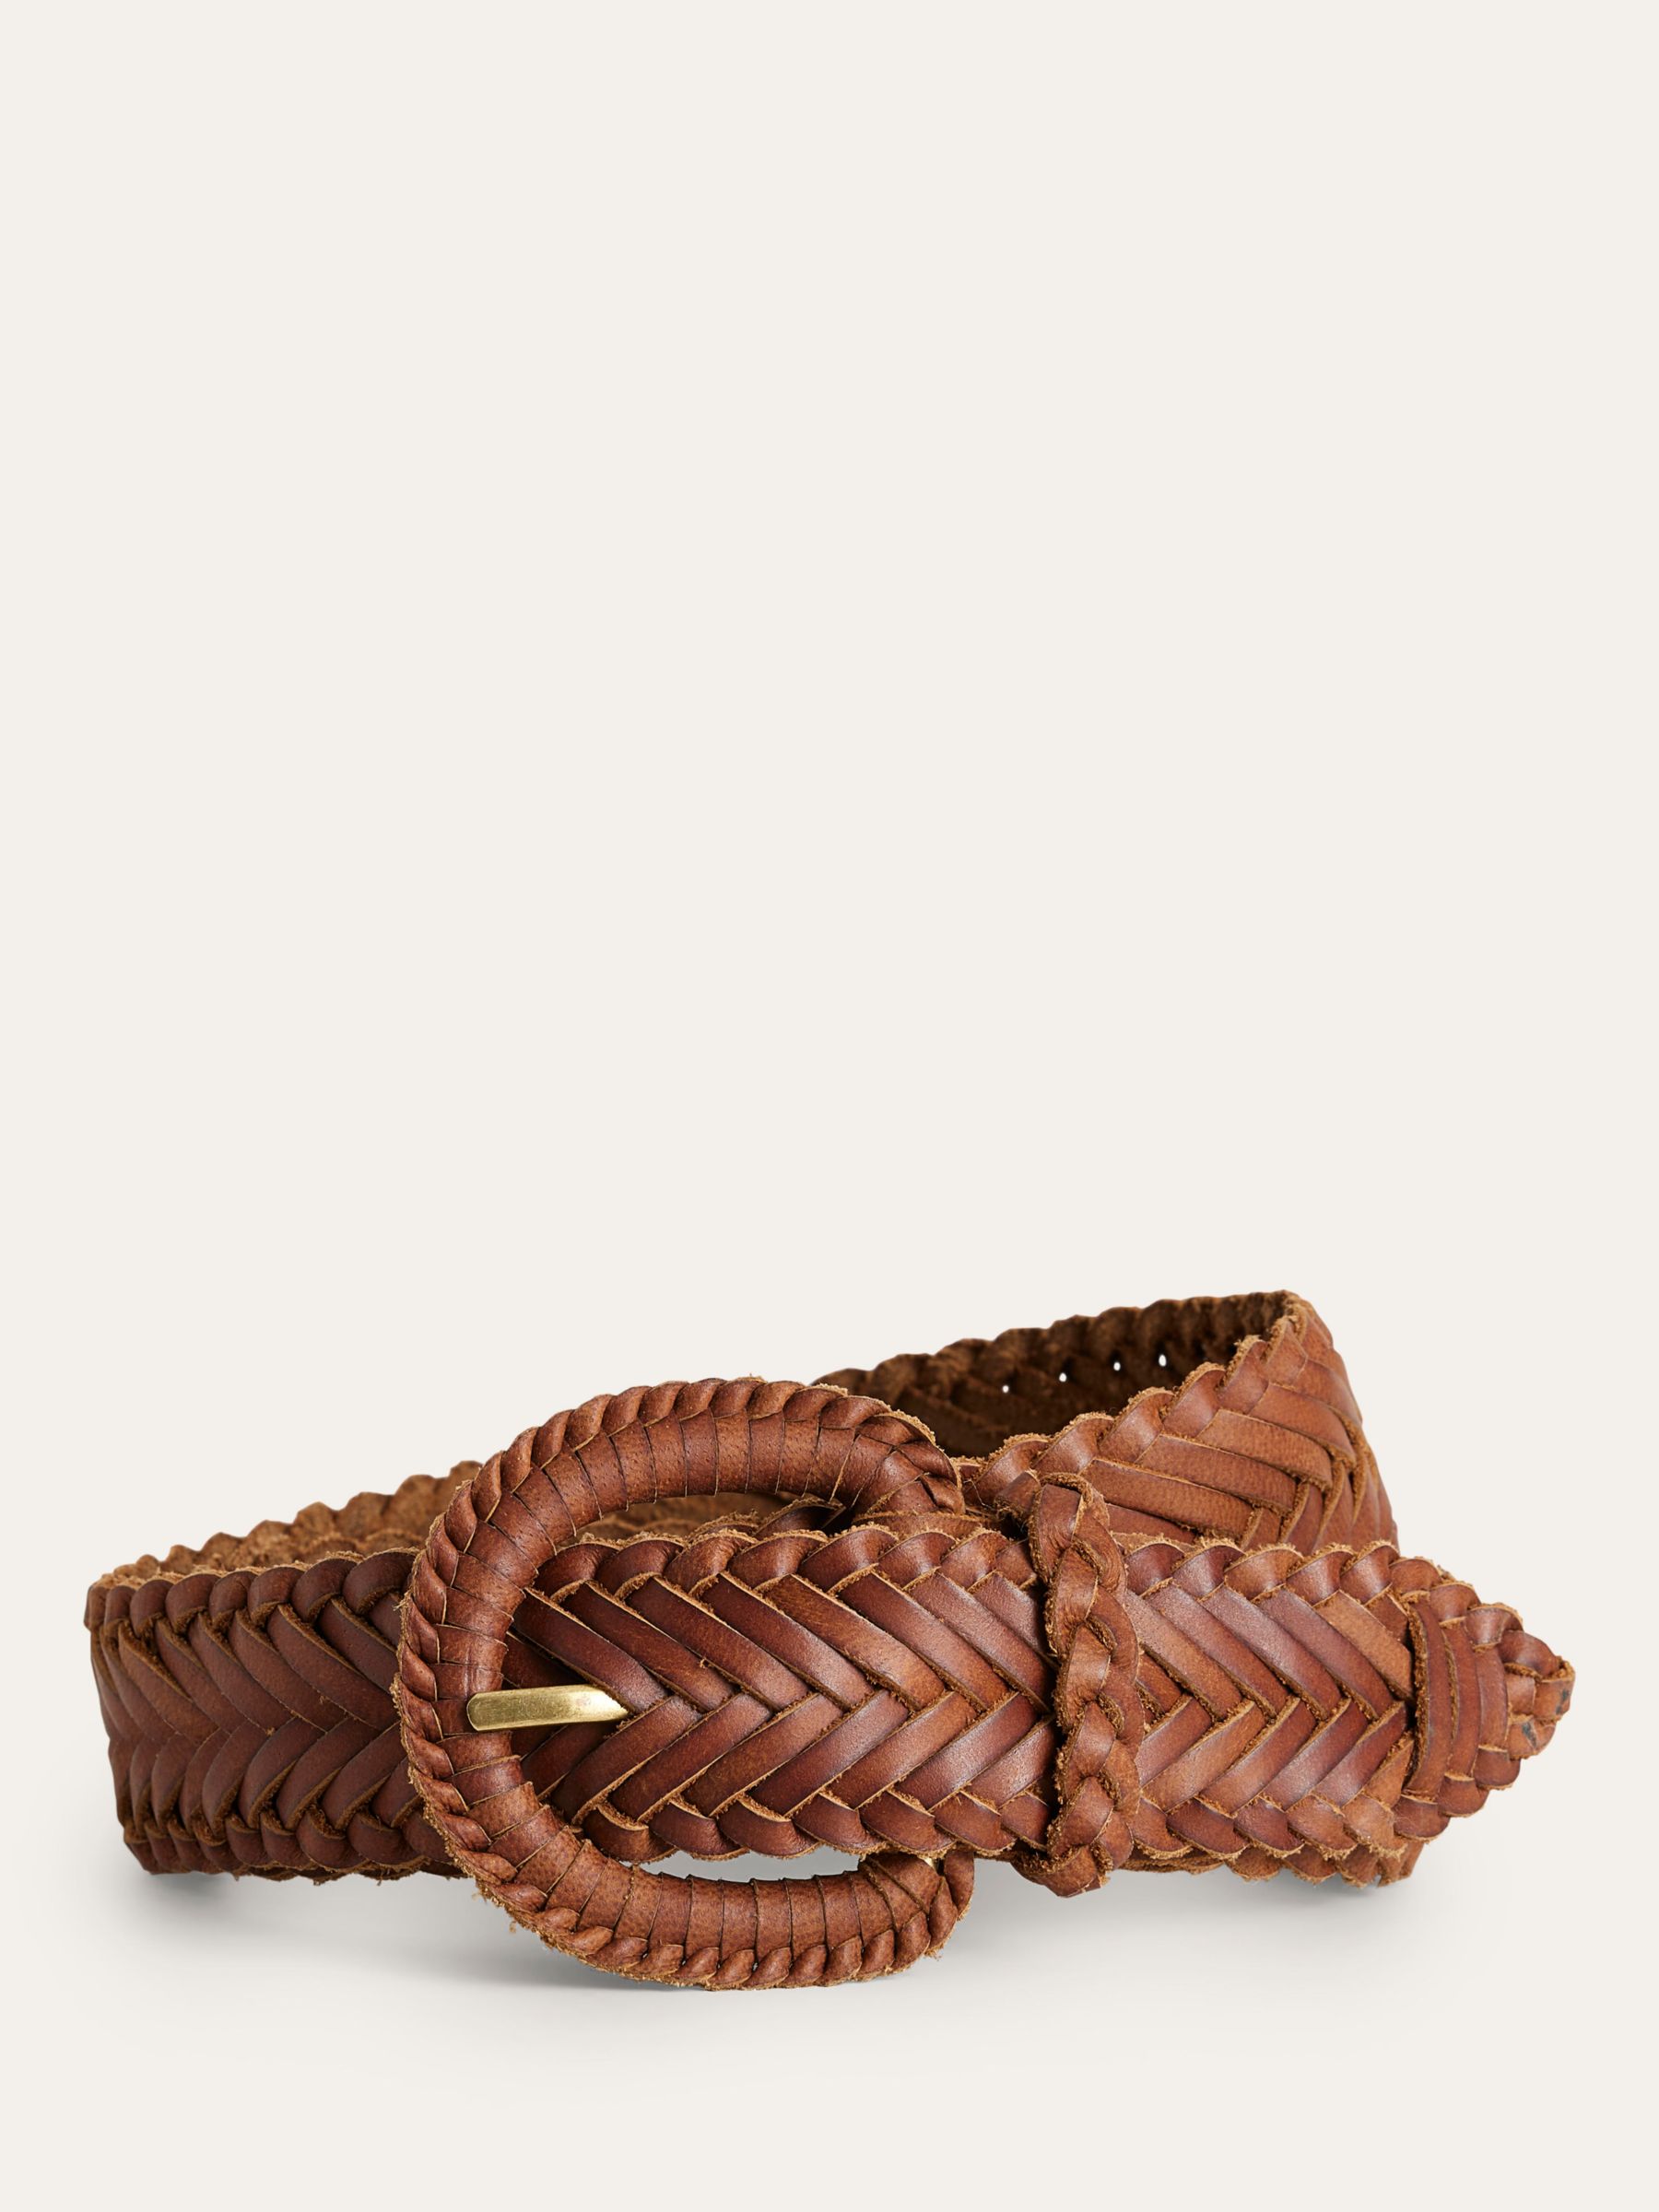 Boden Woven Leather Belt, Tan at John Lewis & Partners